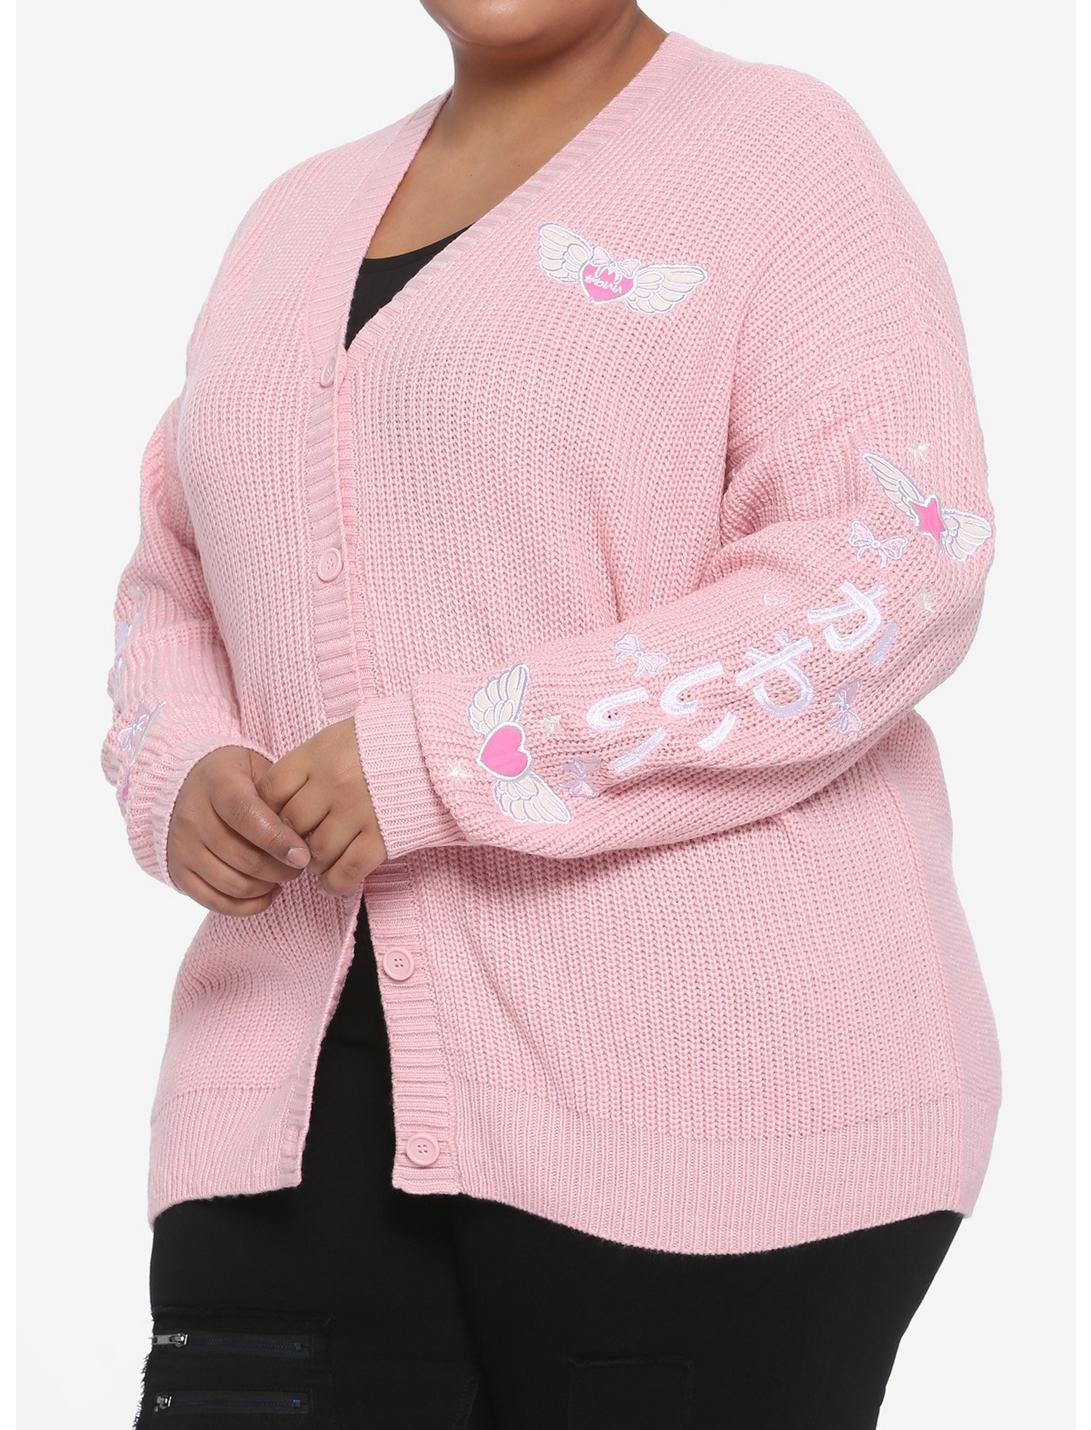 Kawaii Wings Embroidered Girls Cardigan Plus Size, PINK, hi-res